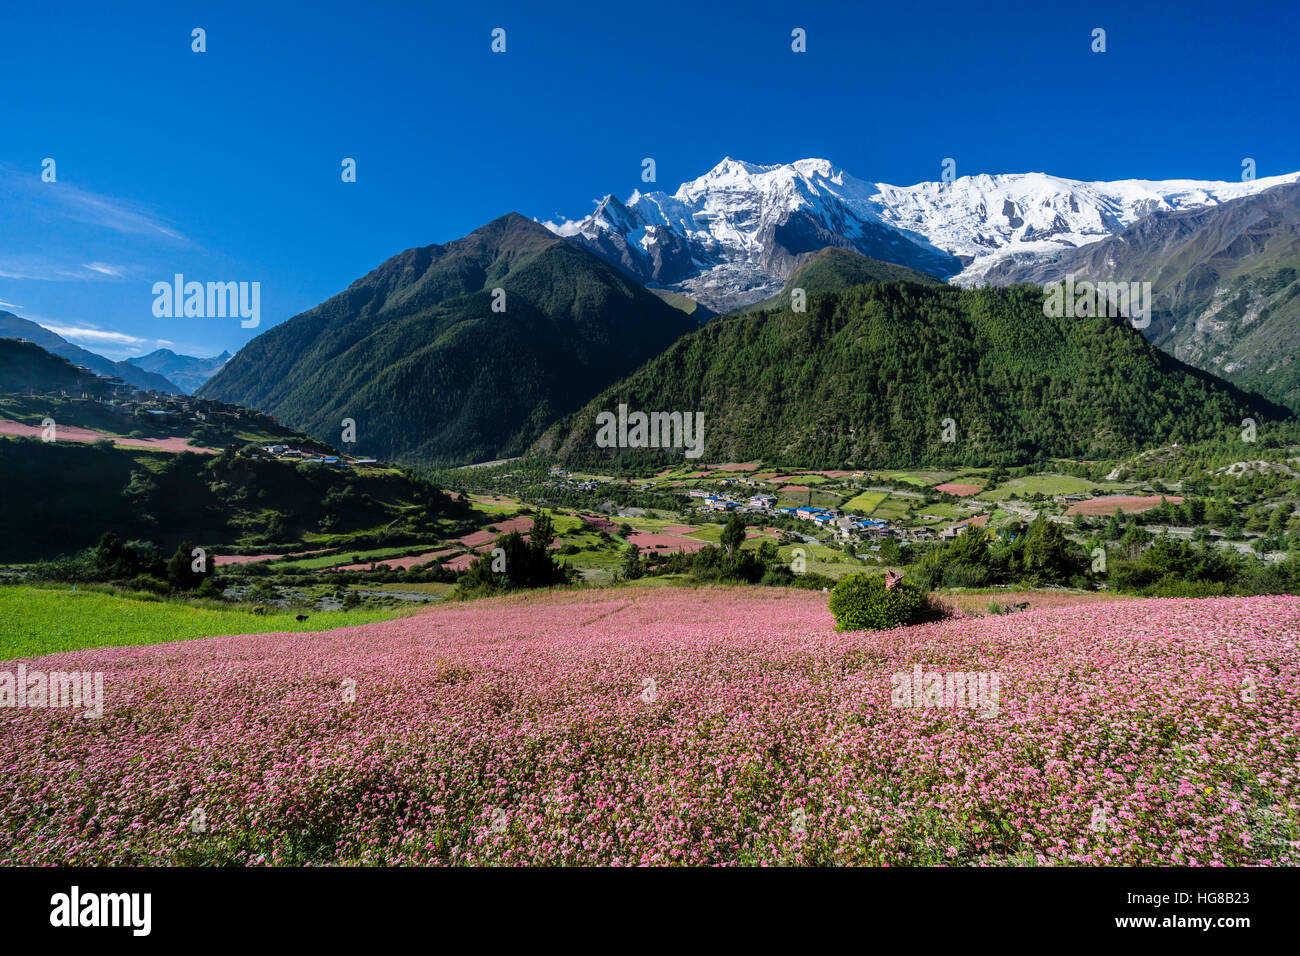 Agricultural landscape with the snowcapped mountain Annapurna 2, pink buckwheat fields in blossom, Upper Marsyangdi valley Stock Photo